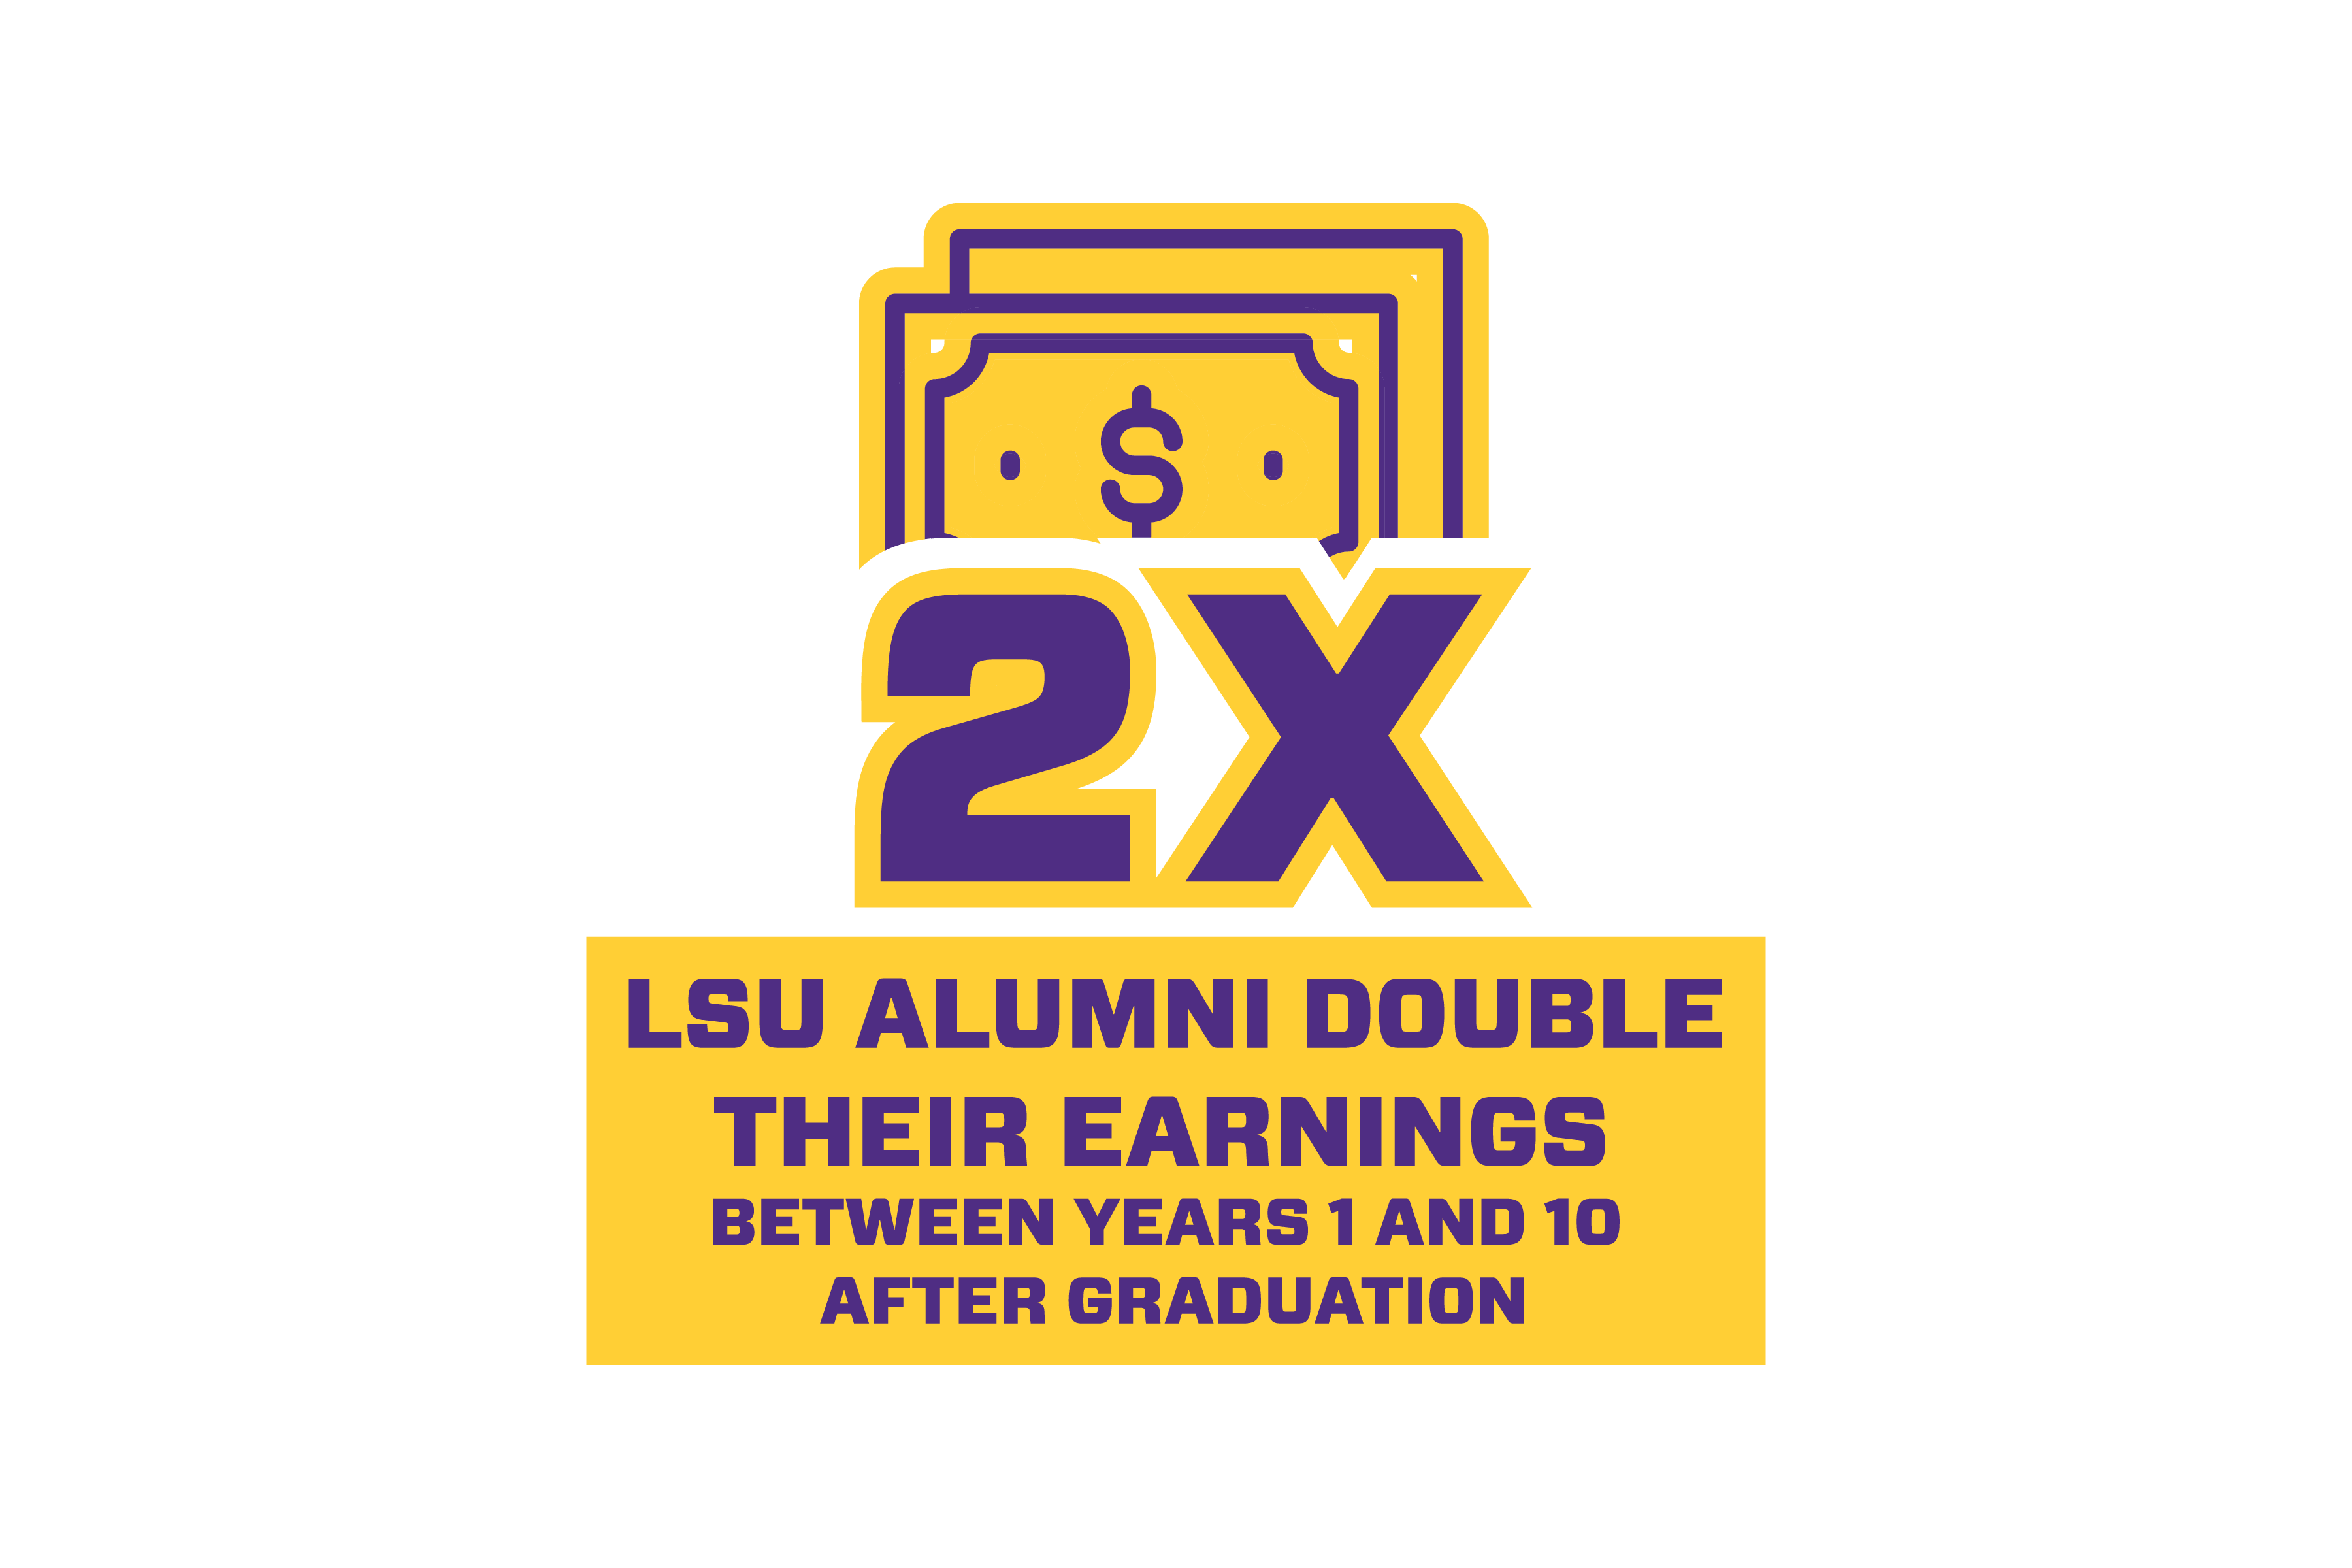 LSU Alumni double their earnings between 1 and 10 years after graduation